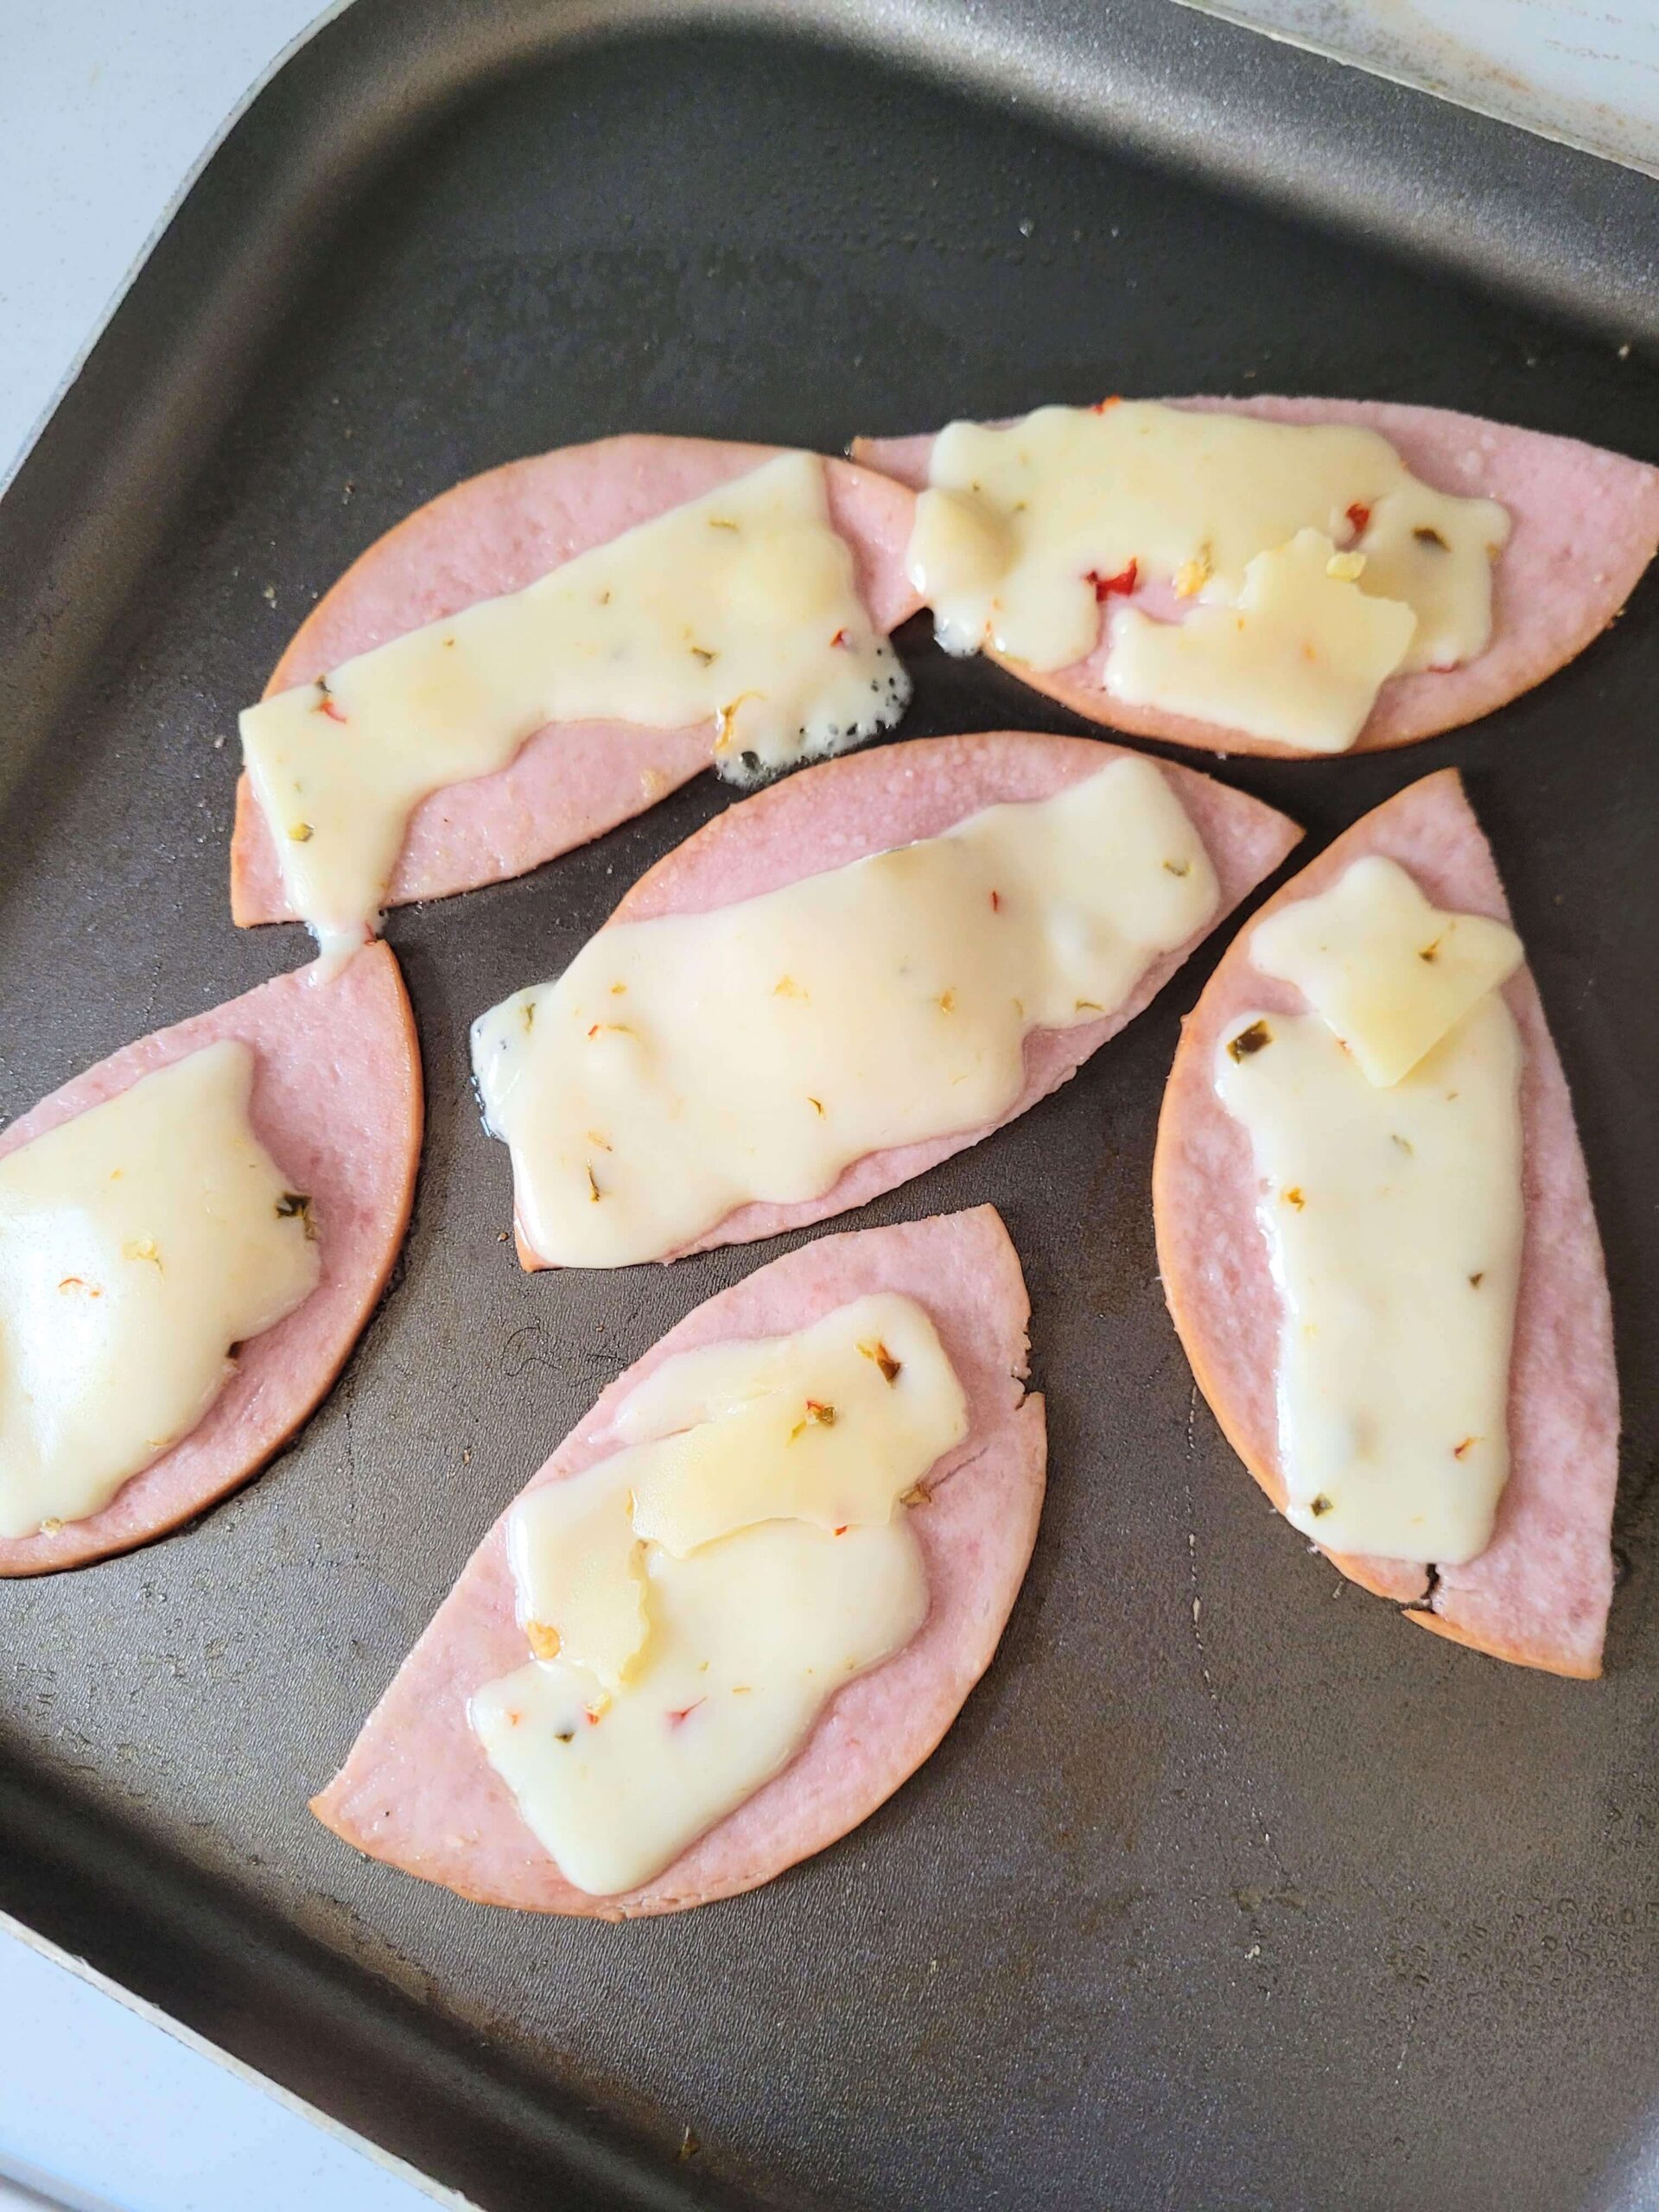 lunch meat cut into strips with cheese melted on top in a black frying pan.